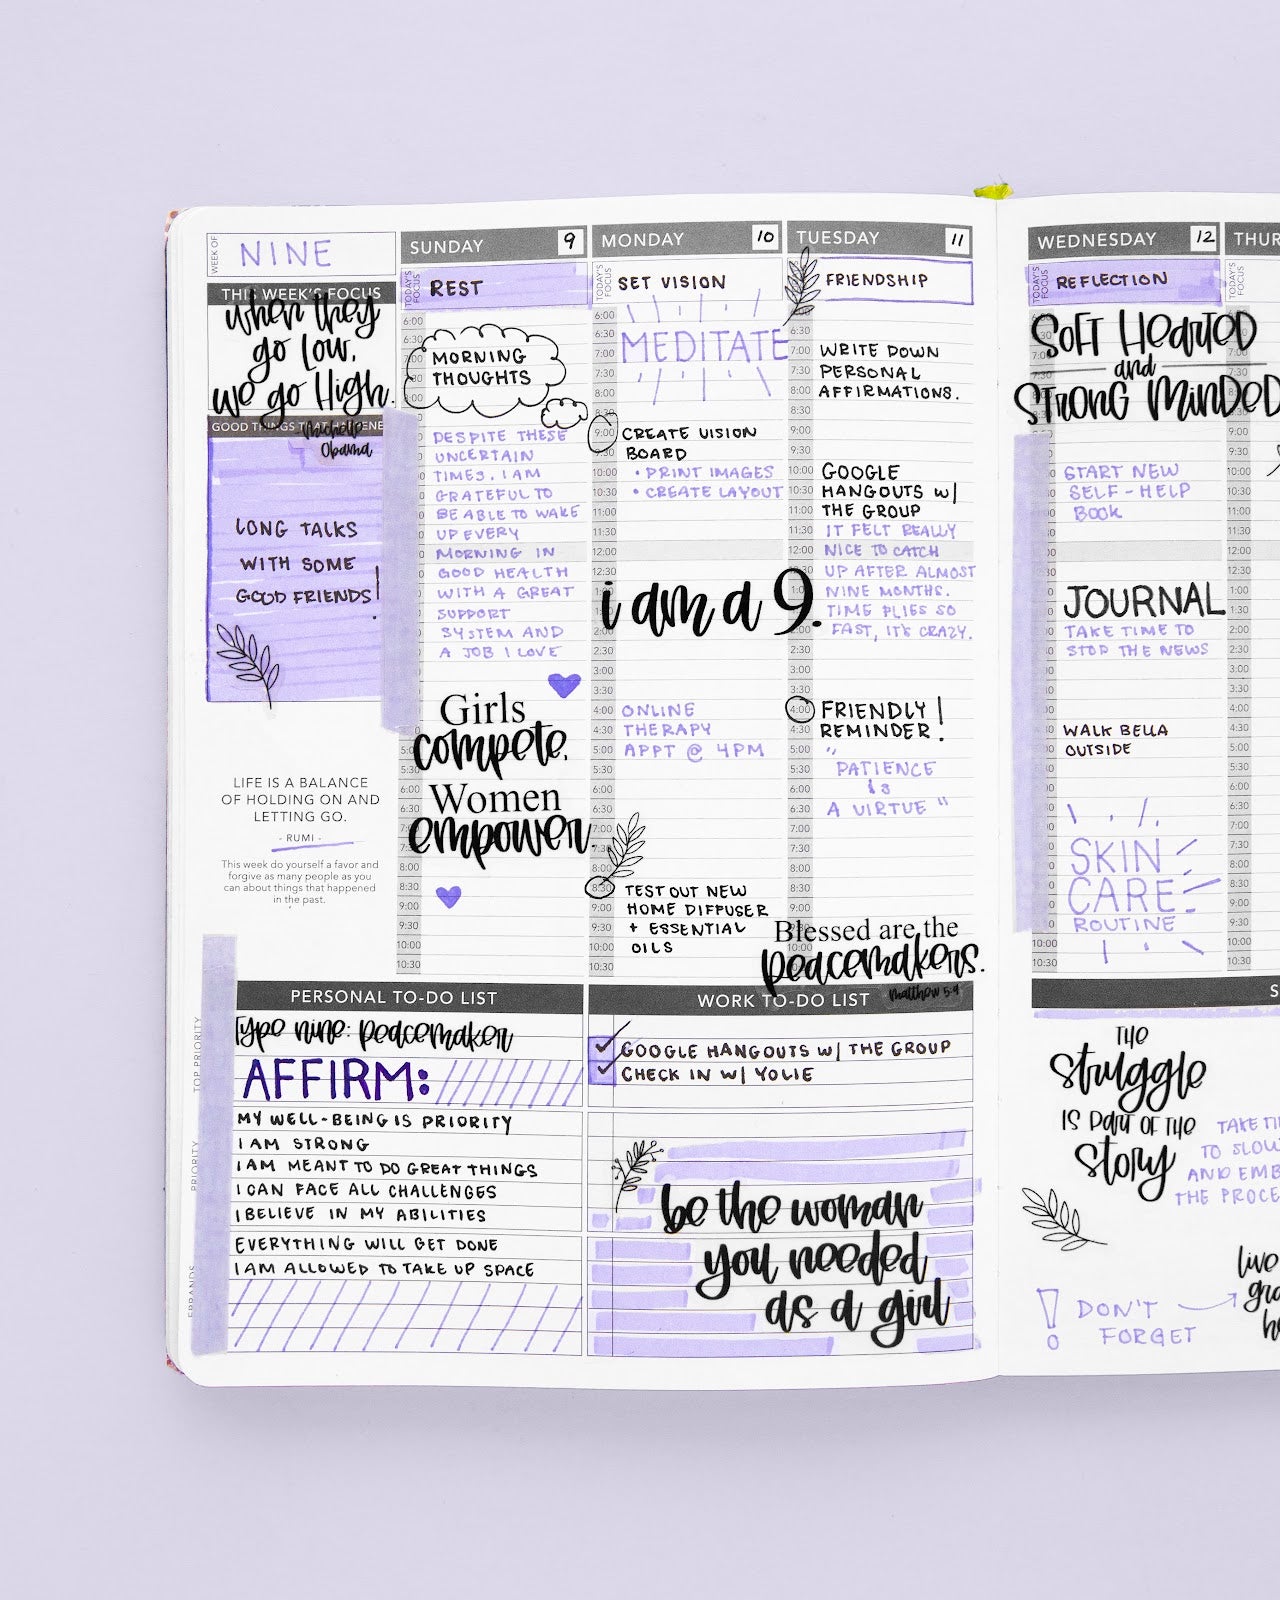 Enneagram 9 Passion Planner Layout (The Peacemaker)